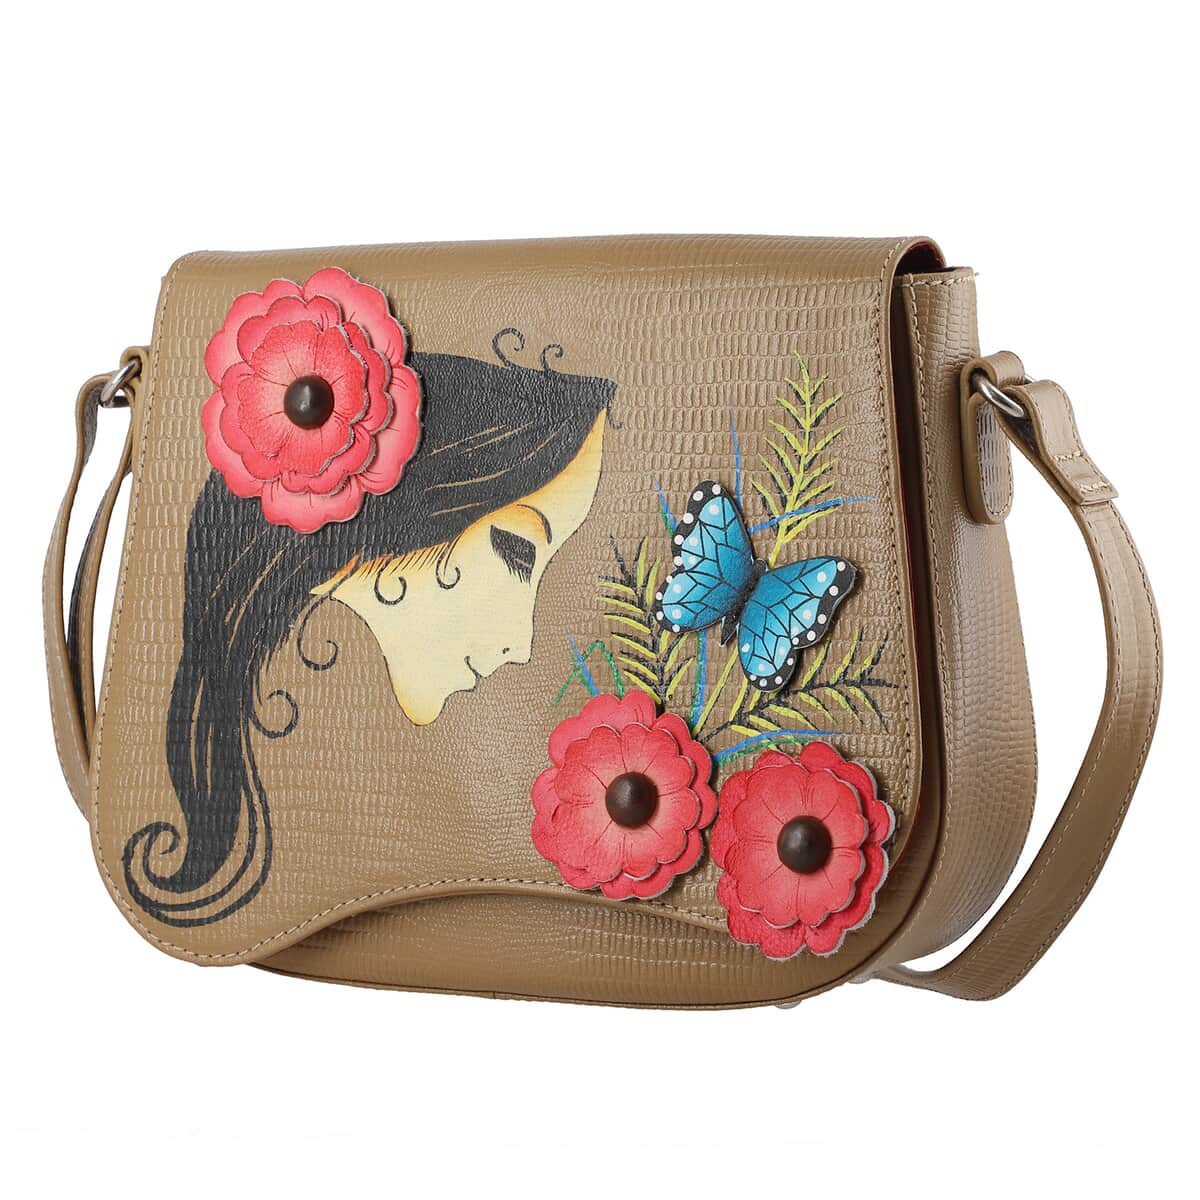 "SUKRITI 100% Genuine Leather Applique Crossbody Bag Theme: Floral Girl  Color: Dark Beige Size: 10 x 3 x 8.5 inches" image number 2